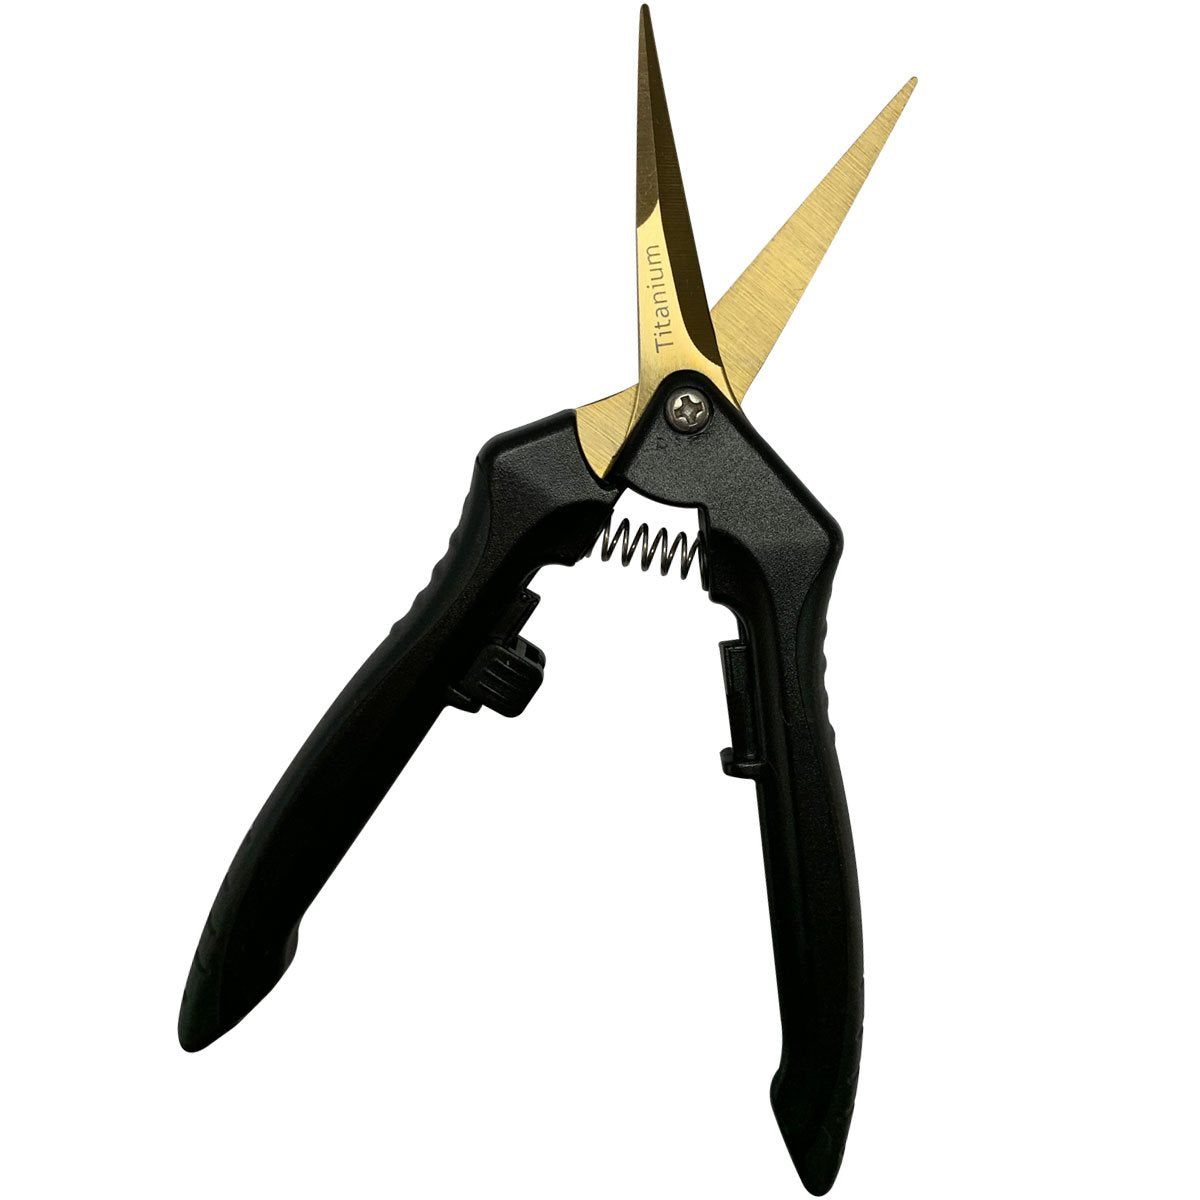 Product Secondary Image:Alfred Curved Titanium Pruner